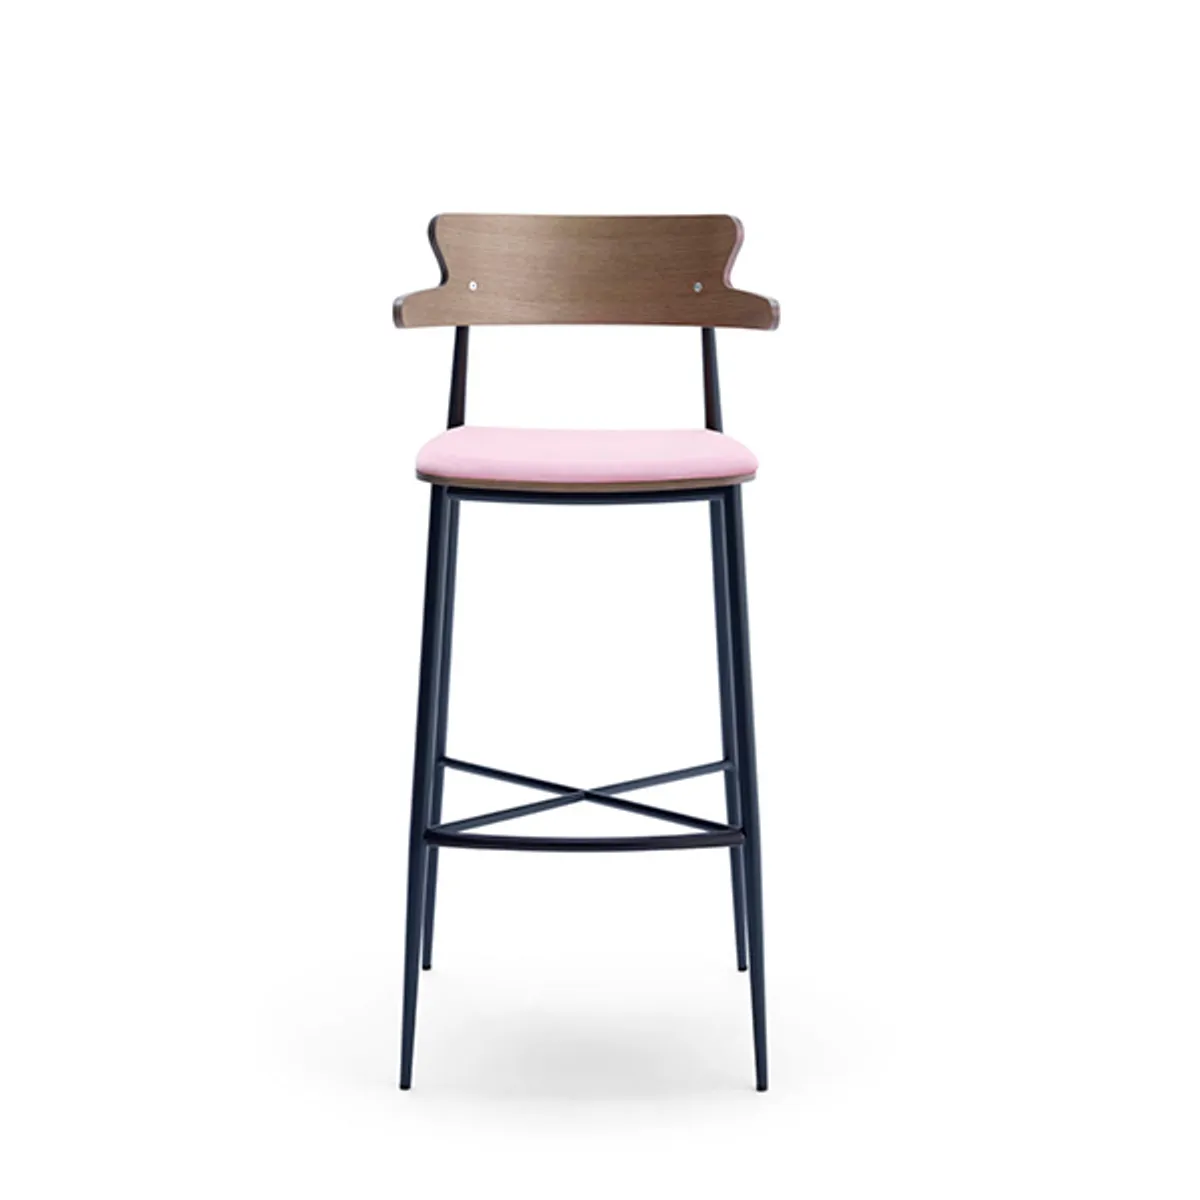 Brooklyn Bar Stool With Arms 01 Inside Out Contracts